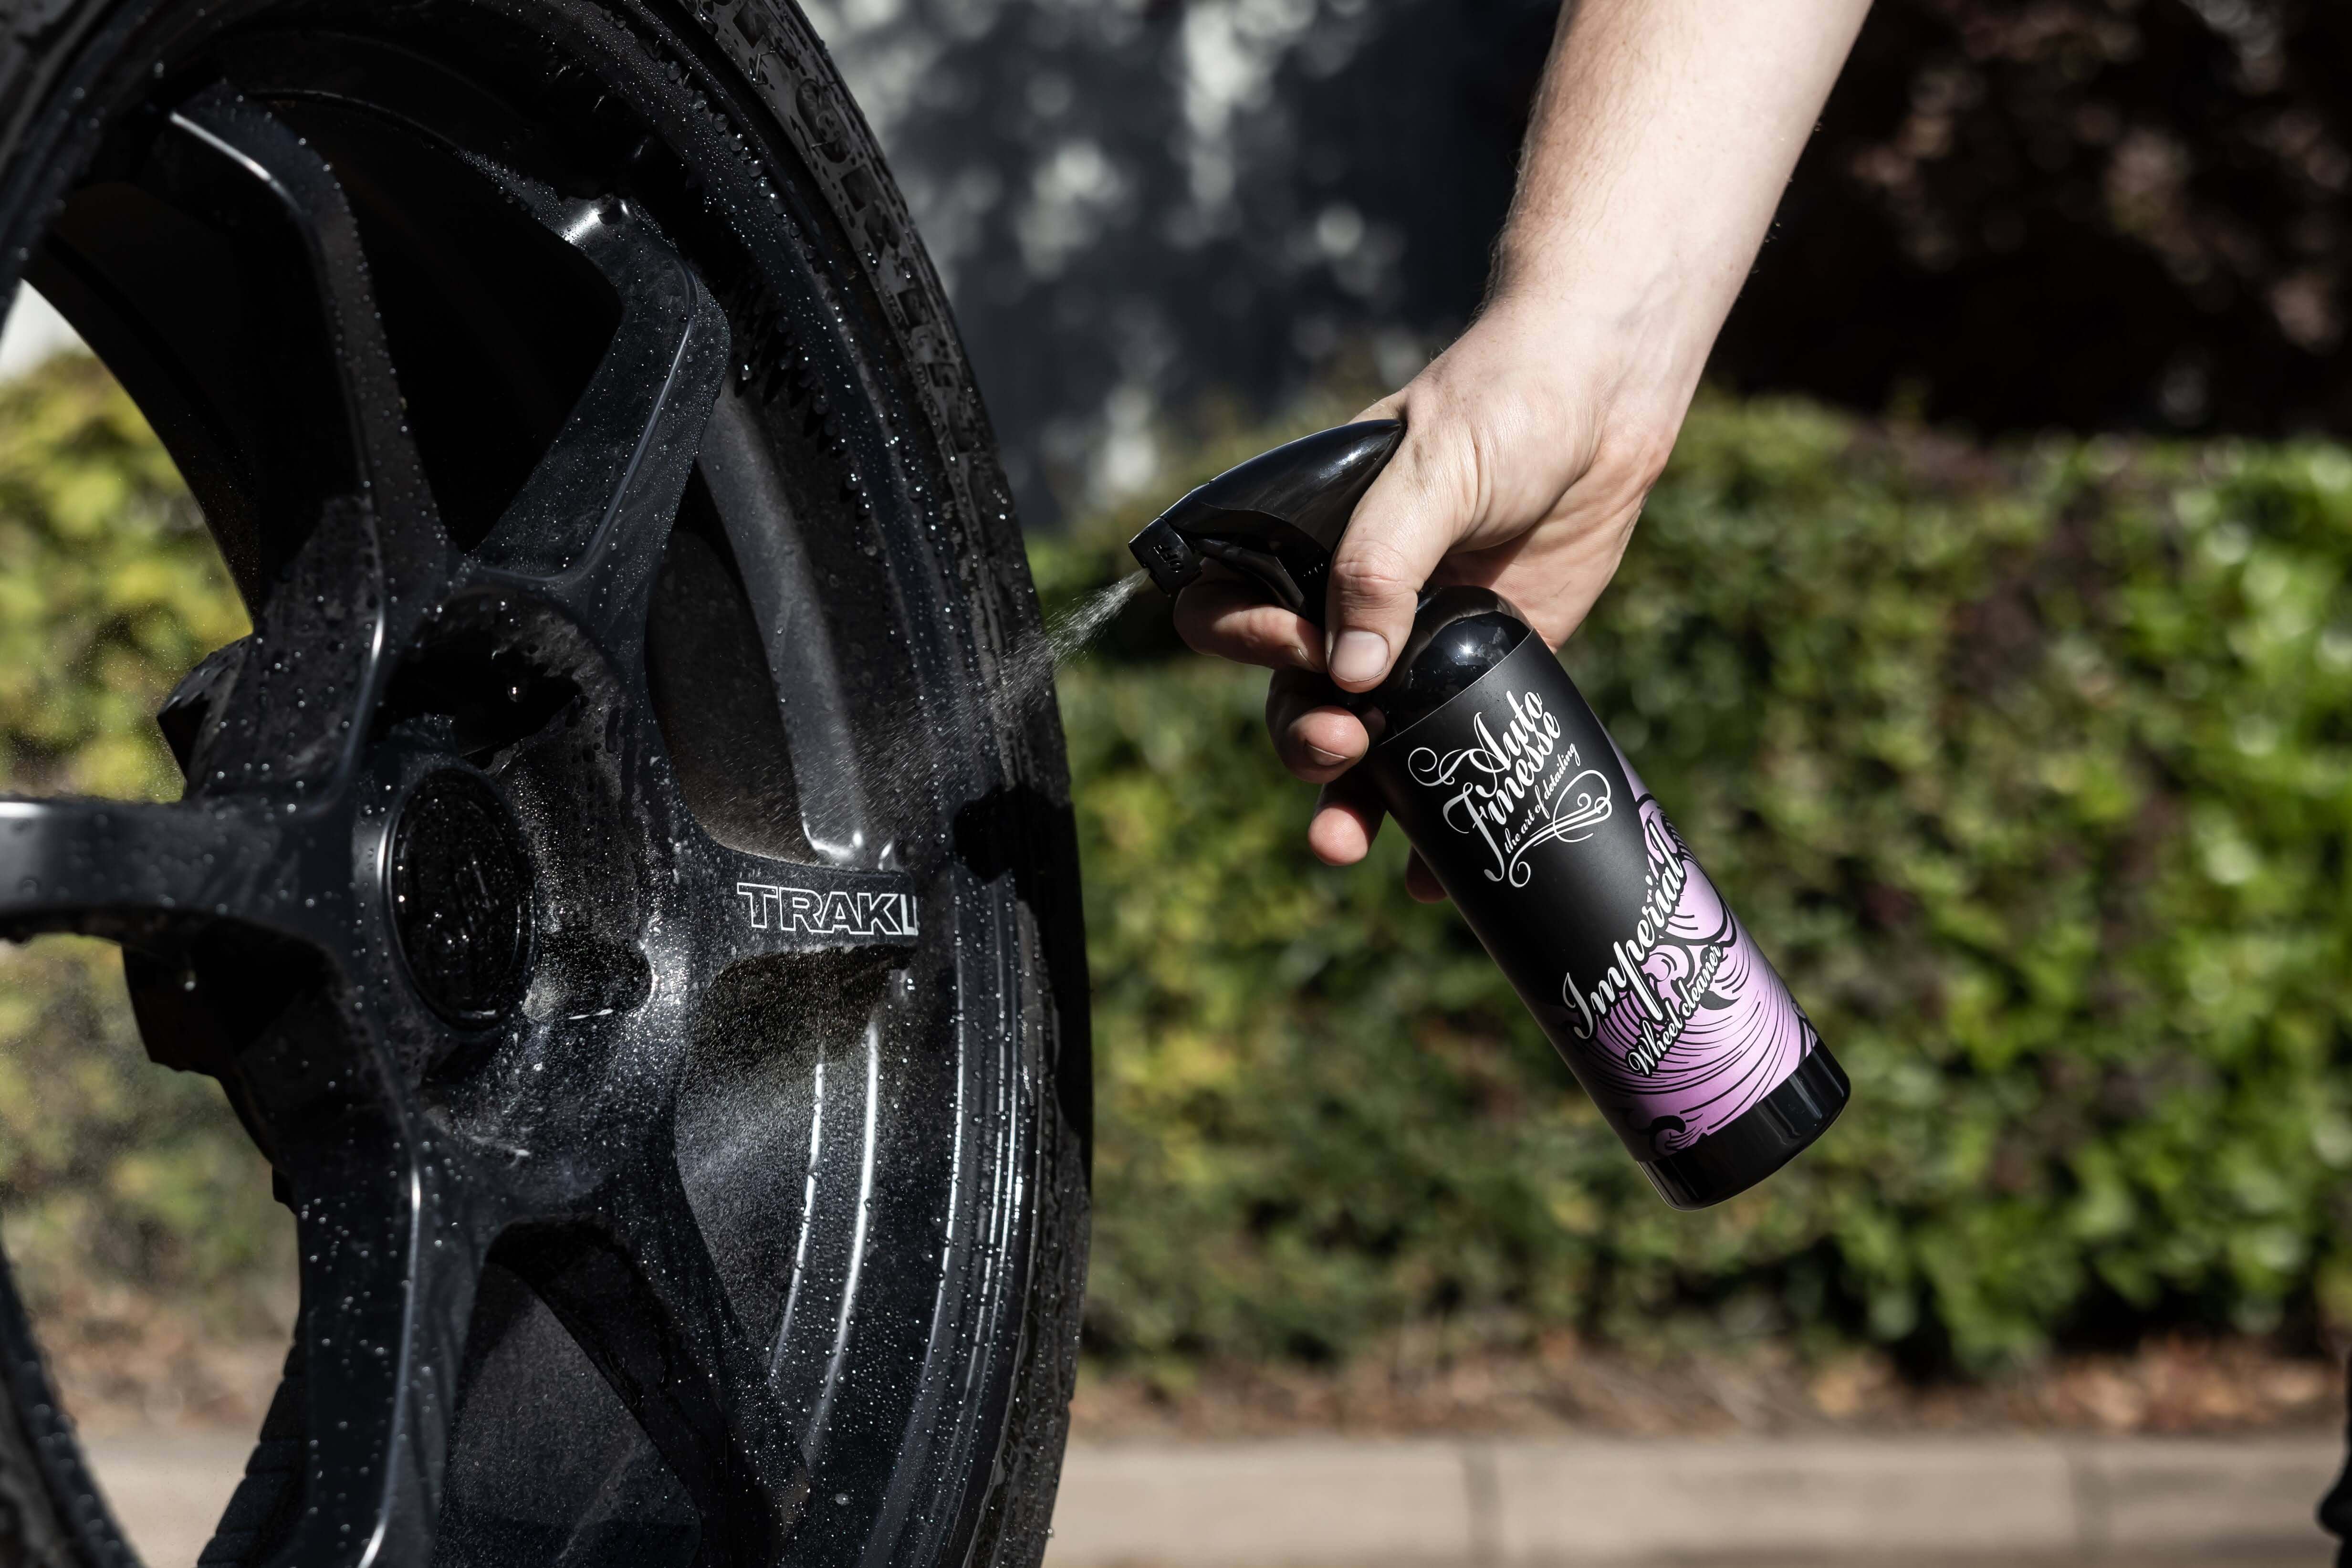 Auto Finesse | Imperial Acid Free Wheel Cleaner | Quick, Safe And Easy